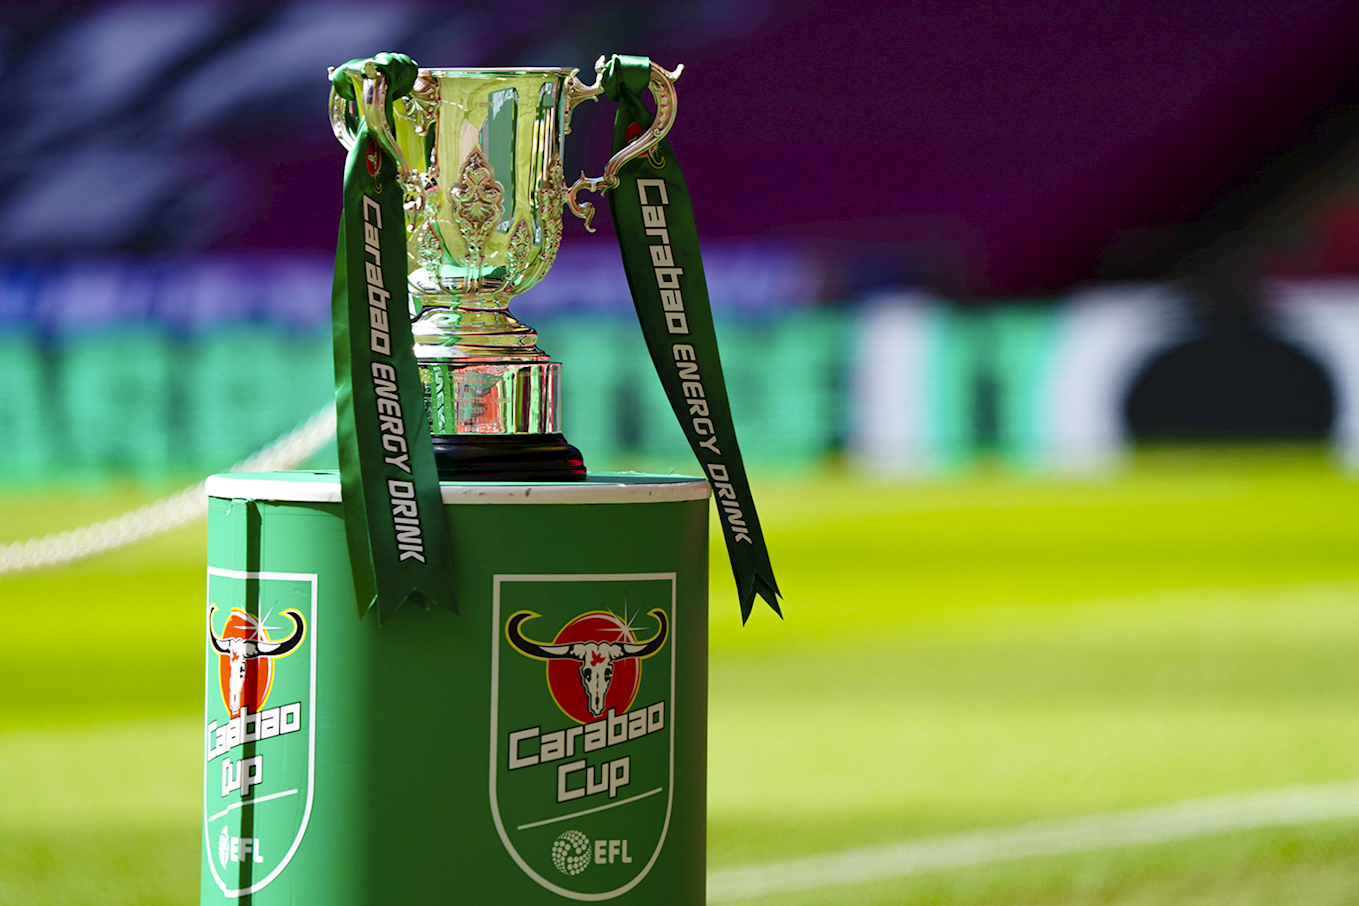 Carabao Cup 2021/22 Draw - totalitariancity